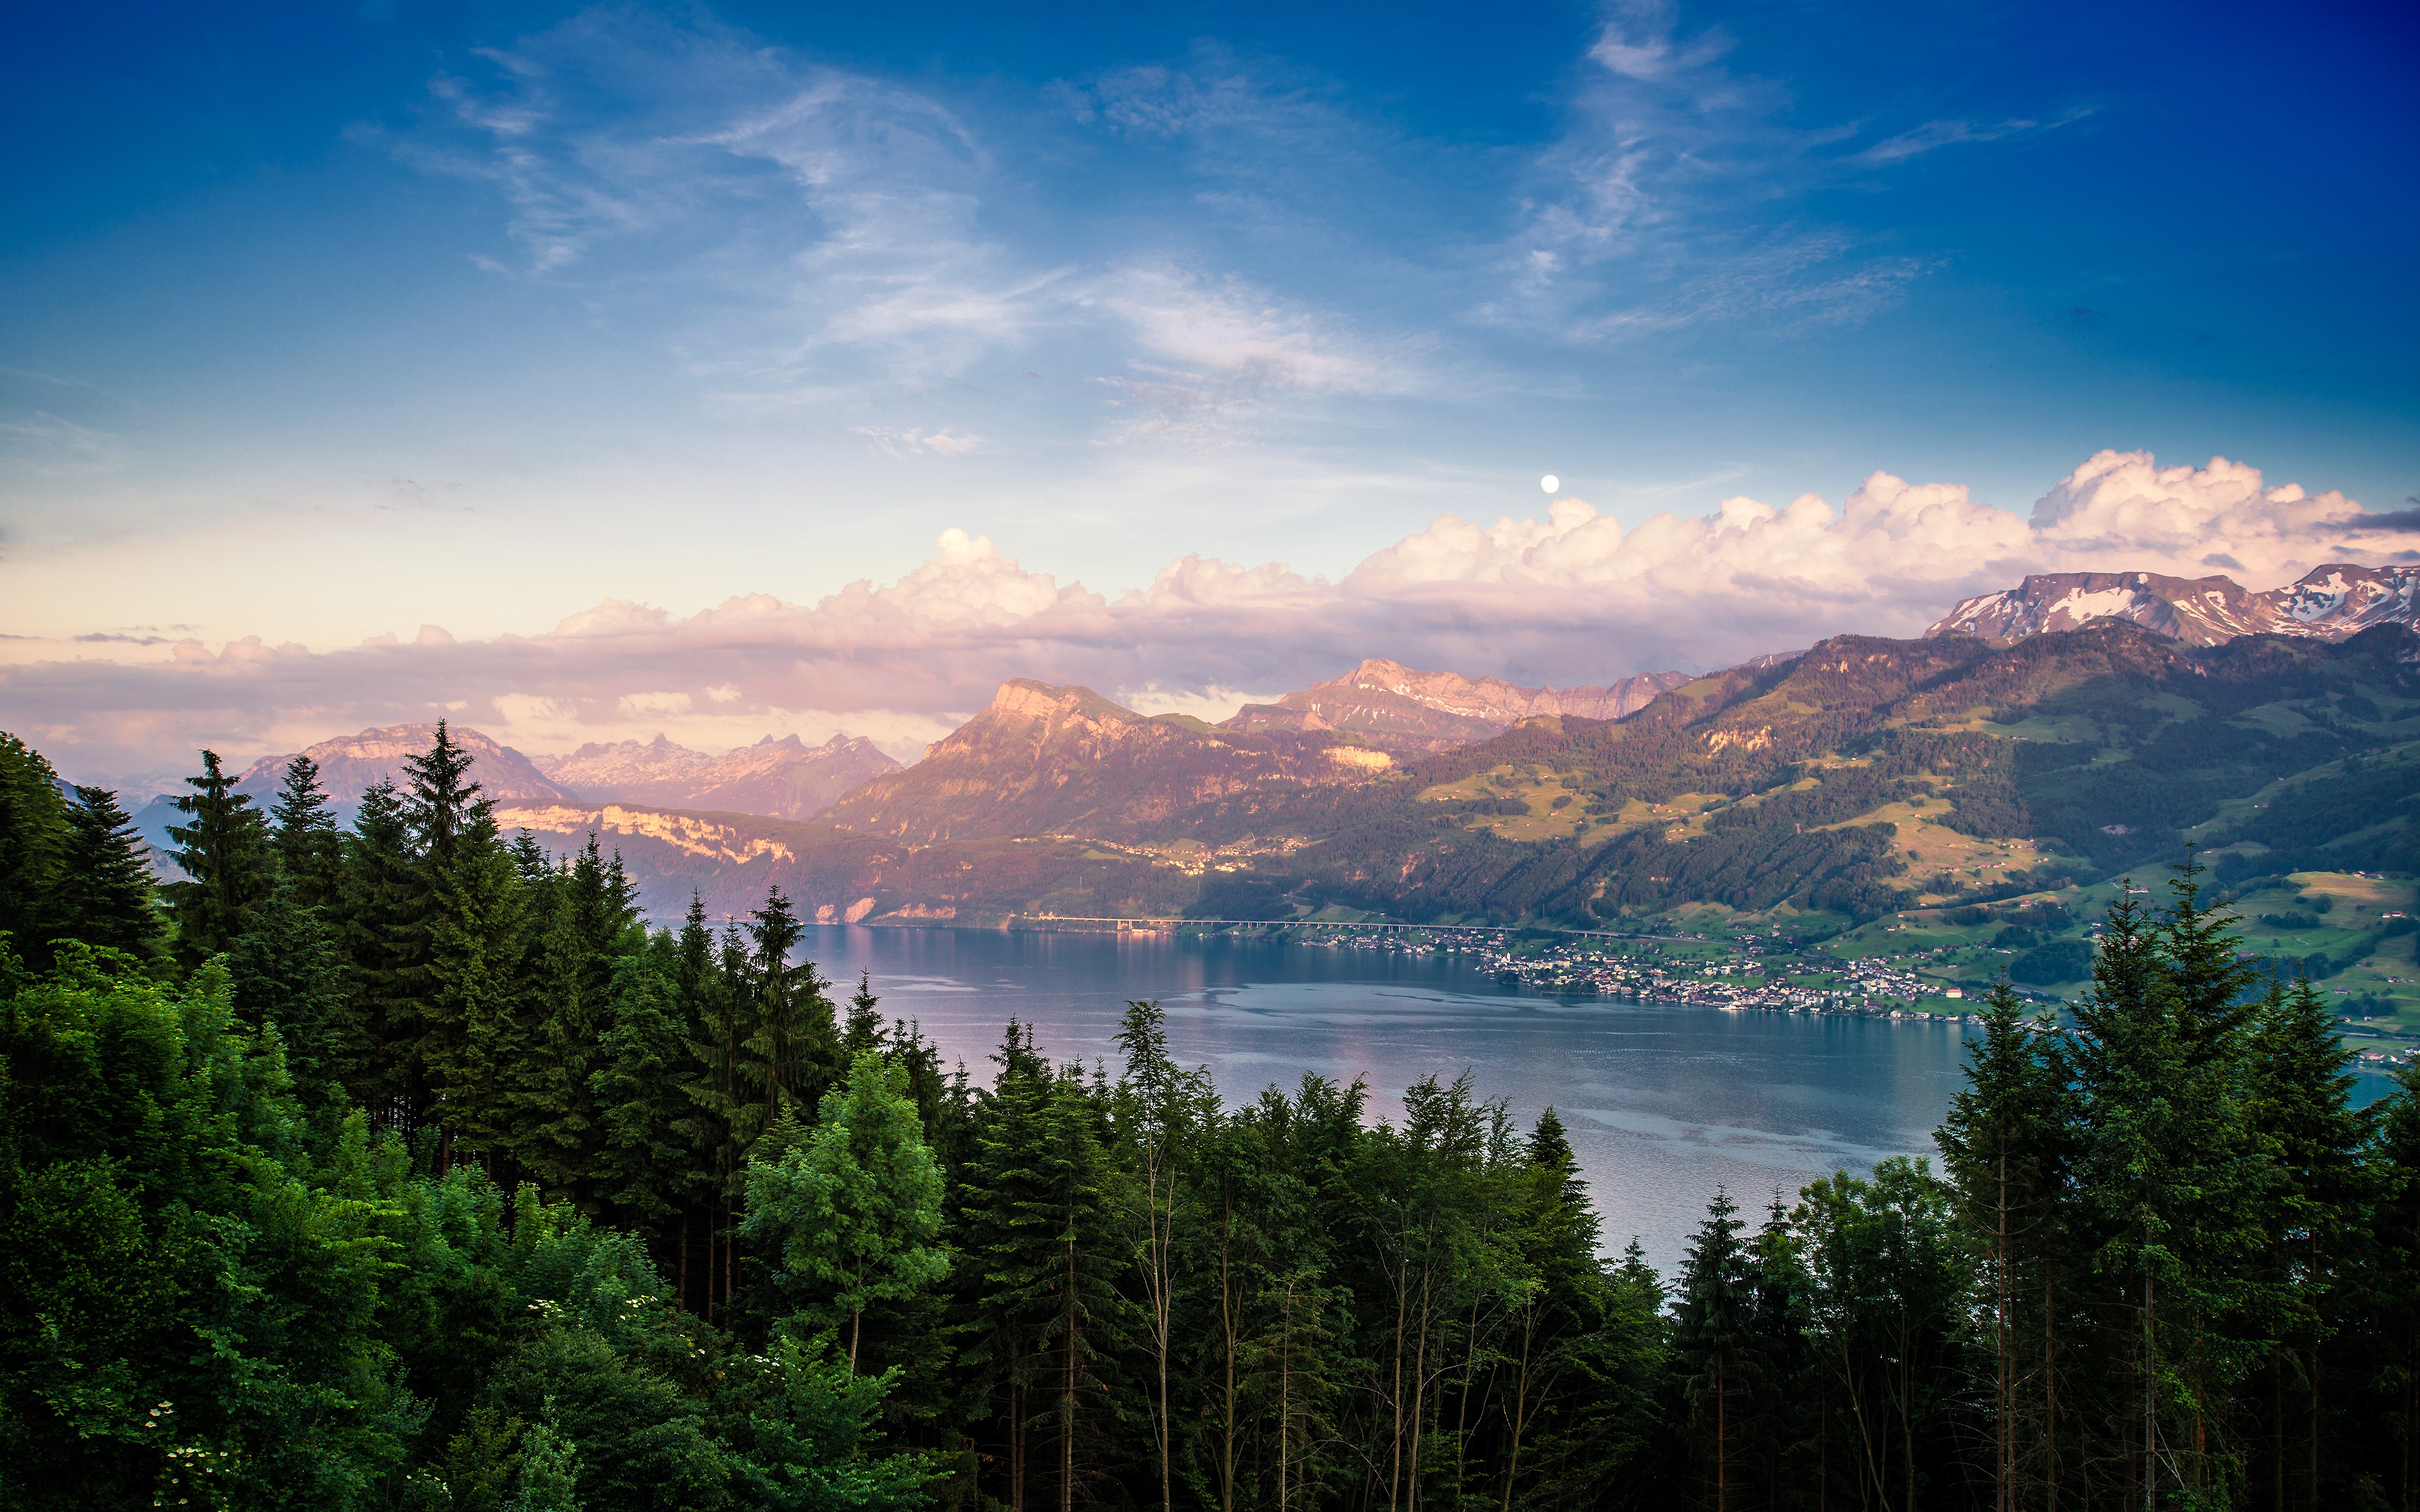 General 3840x2400 lake forest Switzerland Dominic Kamp nature trees mountains outdoors